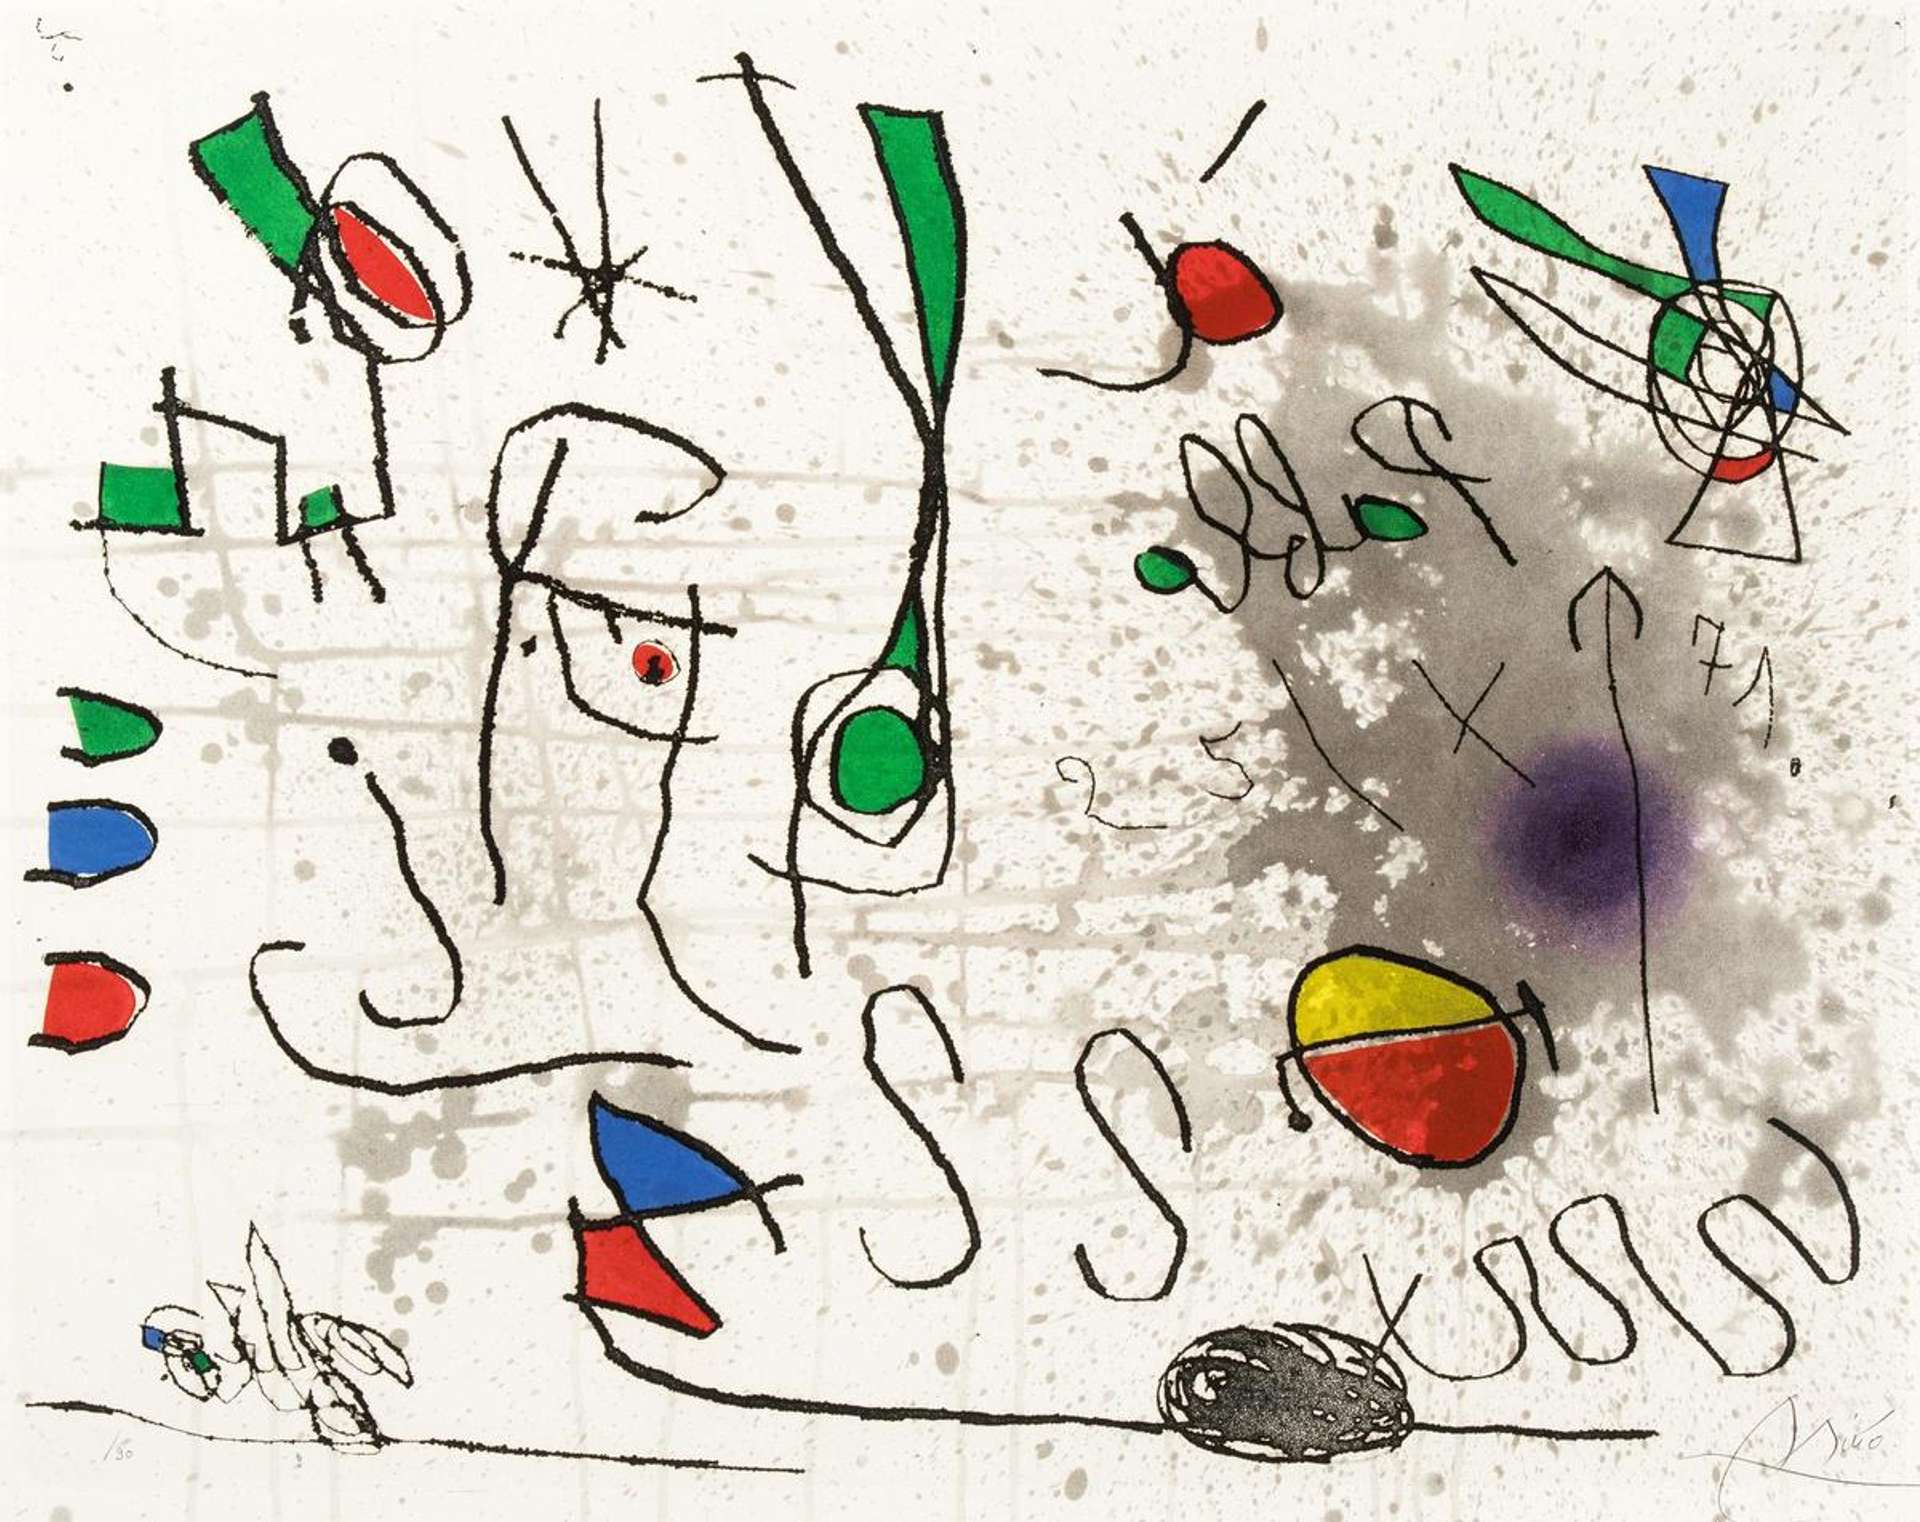 Hommage Picasso - Signed Print by Joan Miró 1972 - MyArtBroker